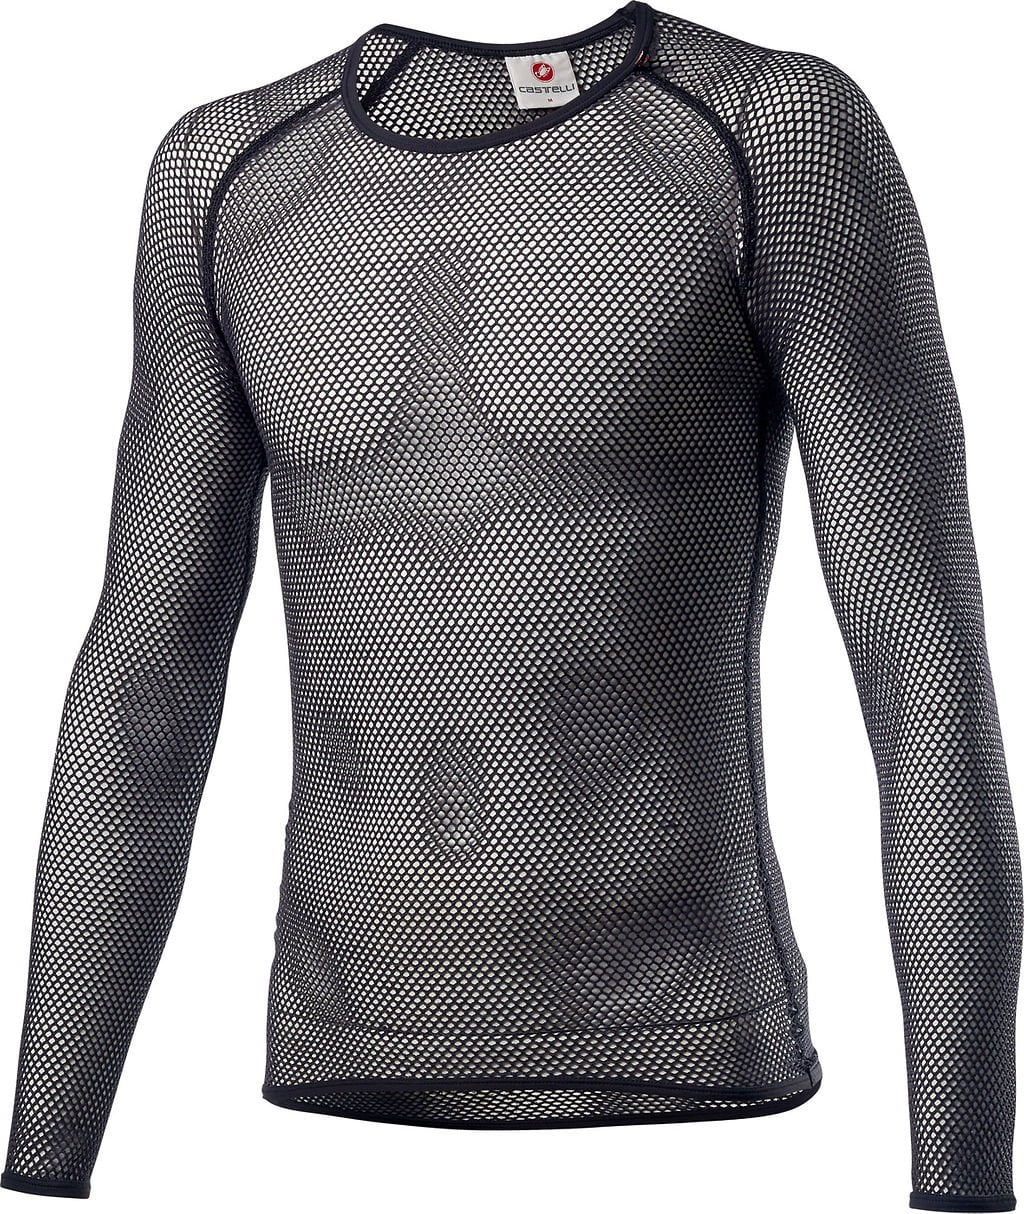 Miracolo Wool Long Sleeve Cycling Base Layer Base Layer, for men, size S